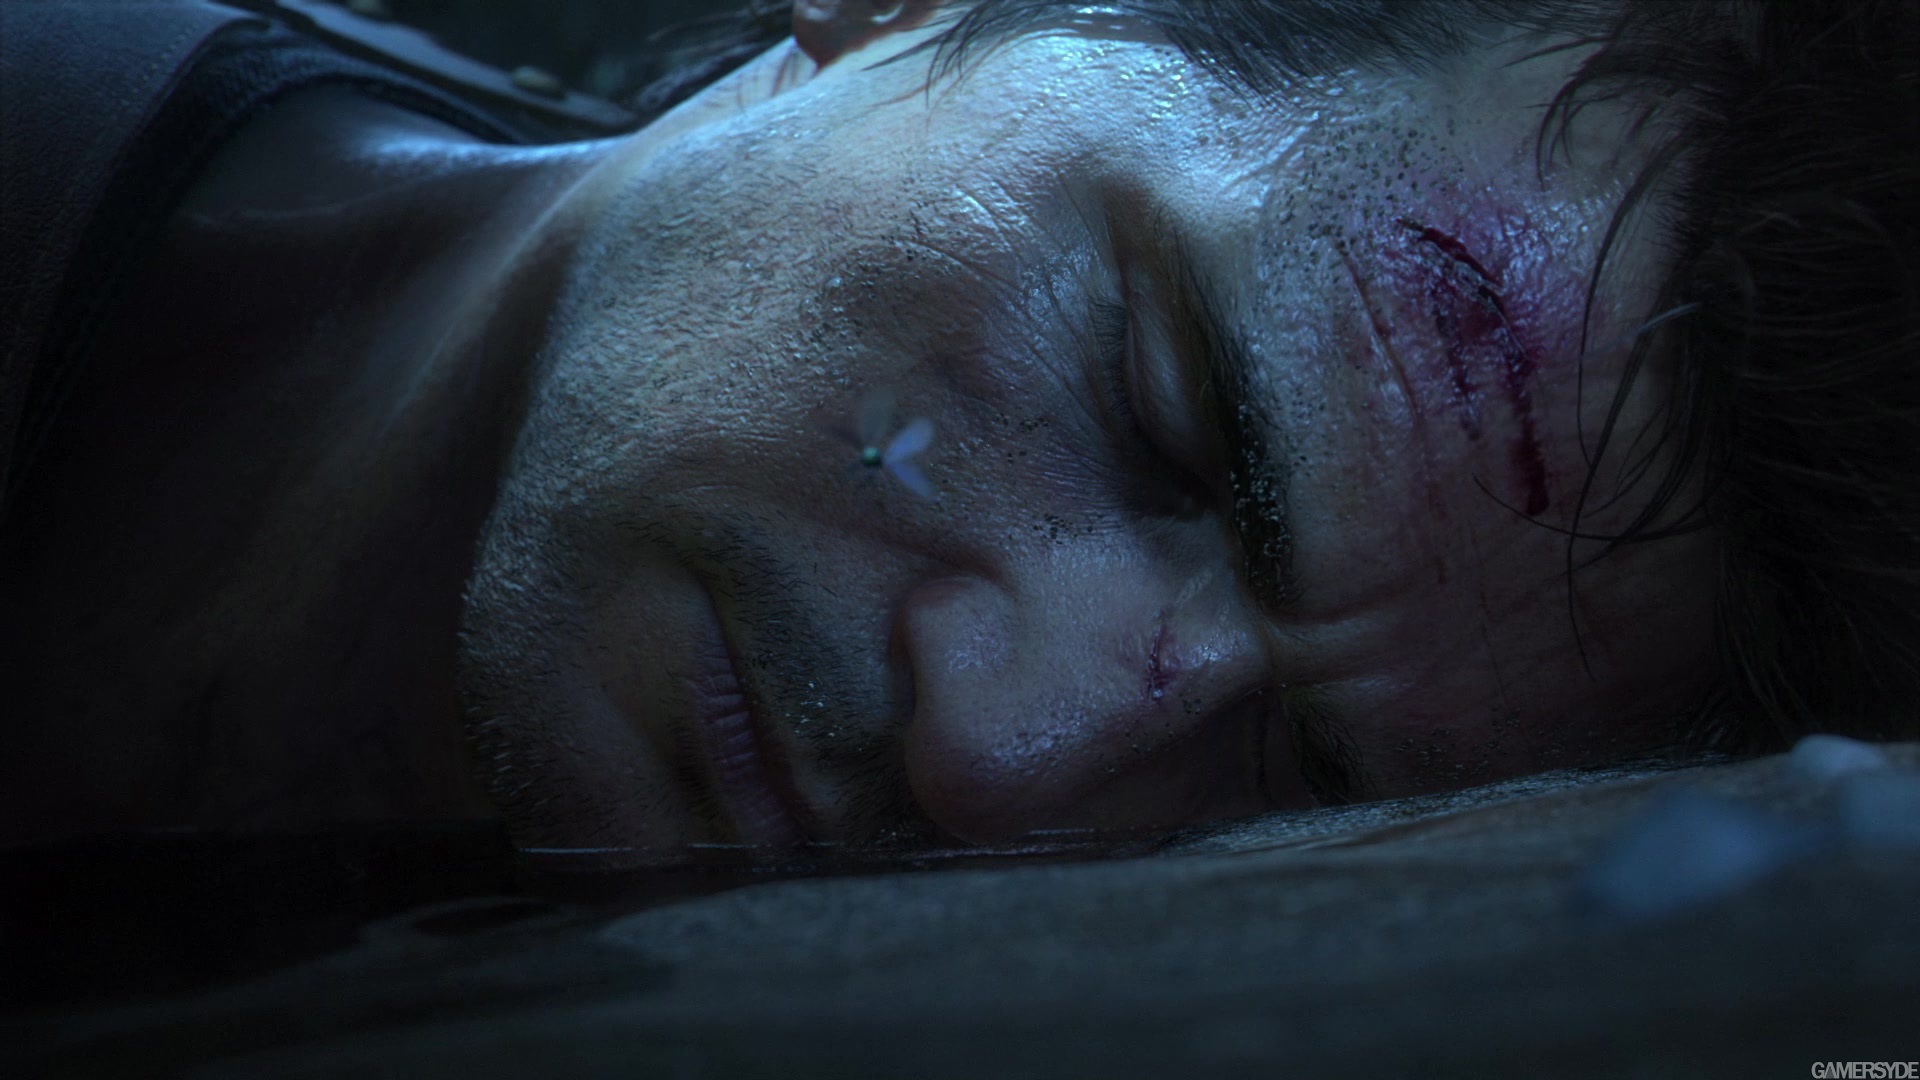 image_uncharted_4_a_thief_s_end-25545-2995_0001.jpg